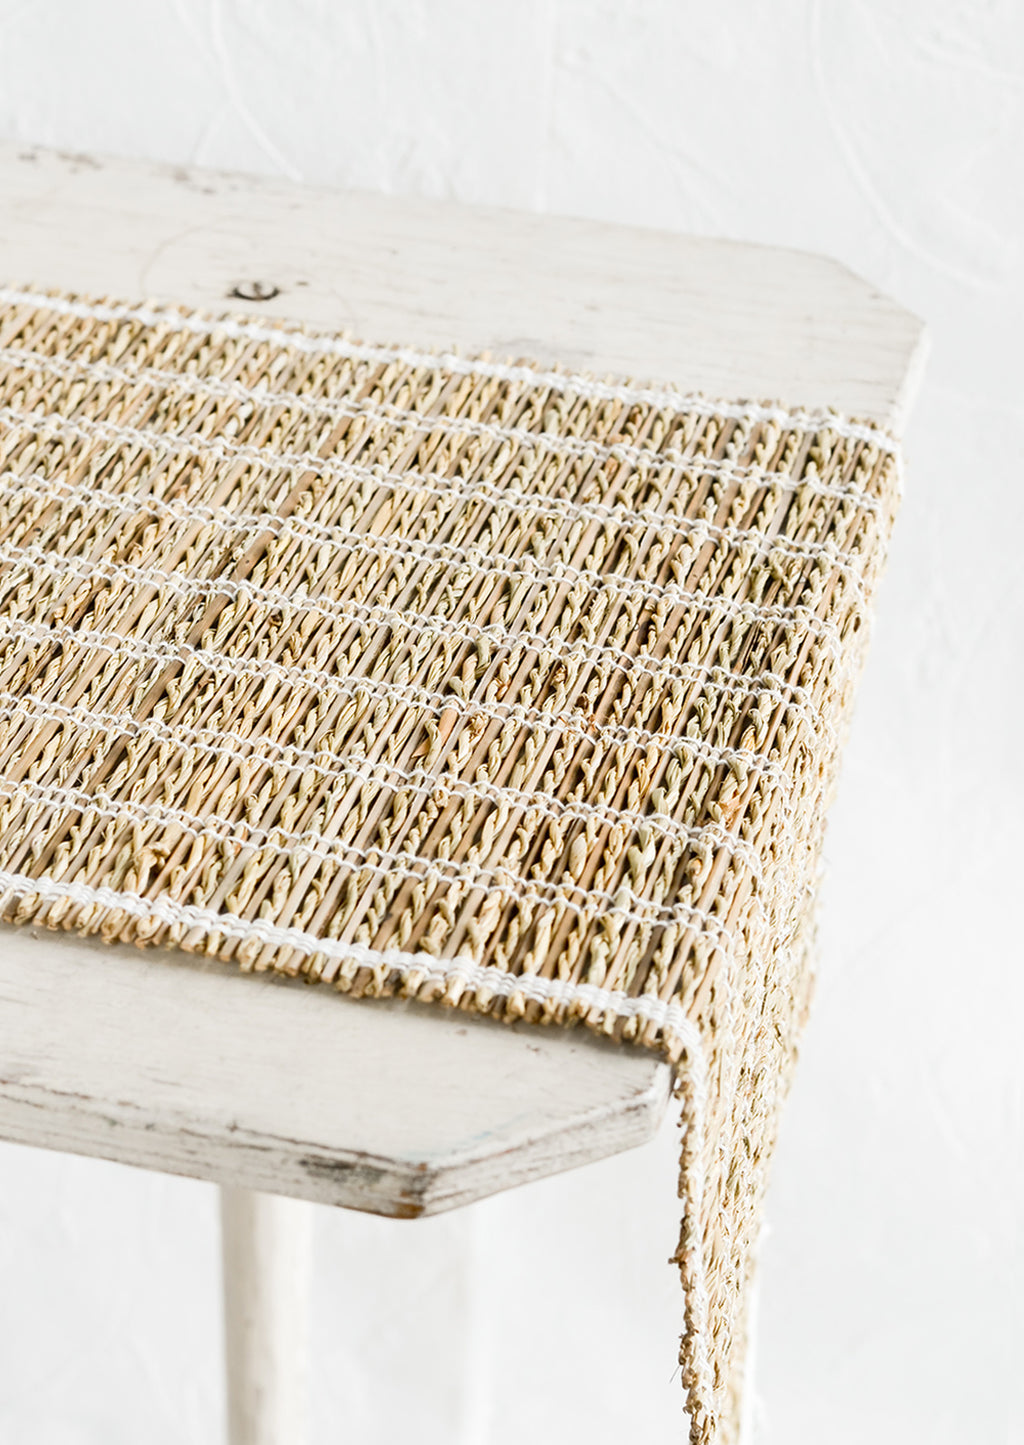 1: A table runner made of natural banana fiber with white stitching.